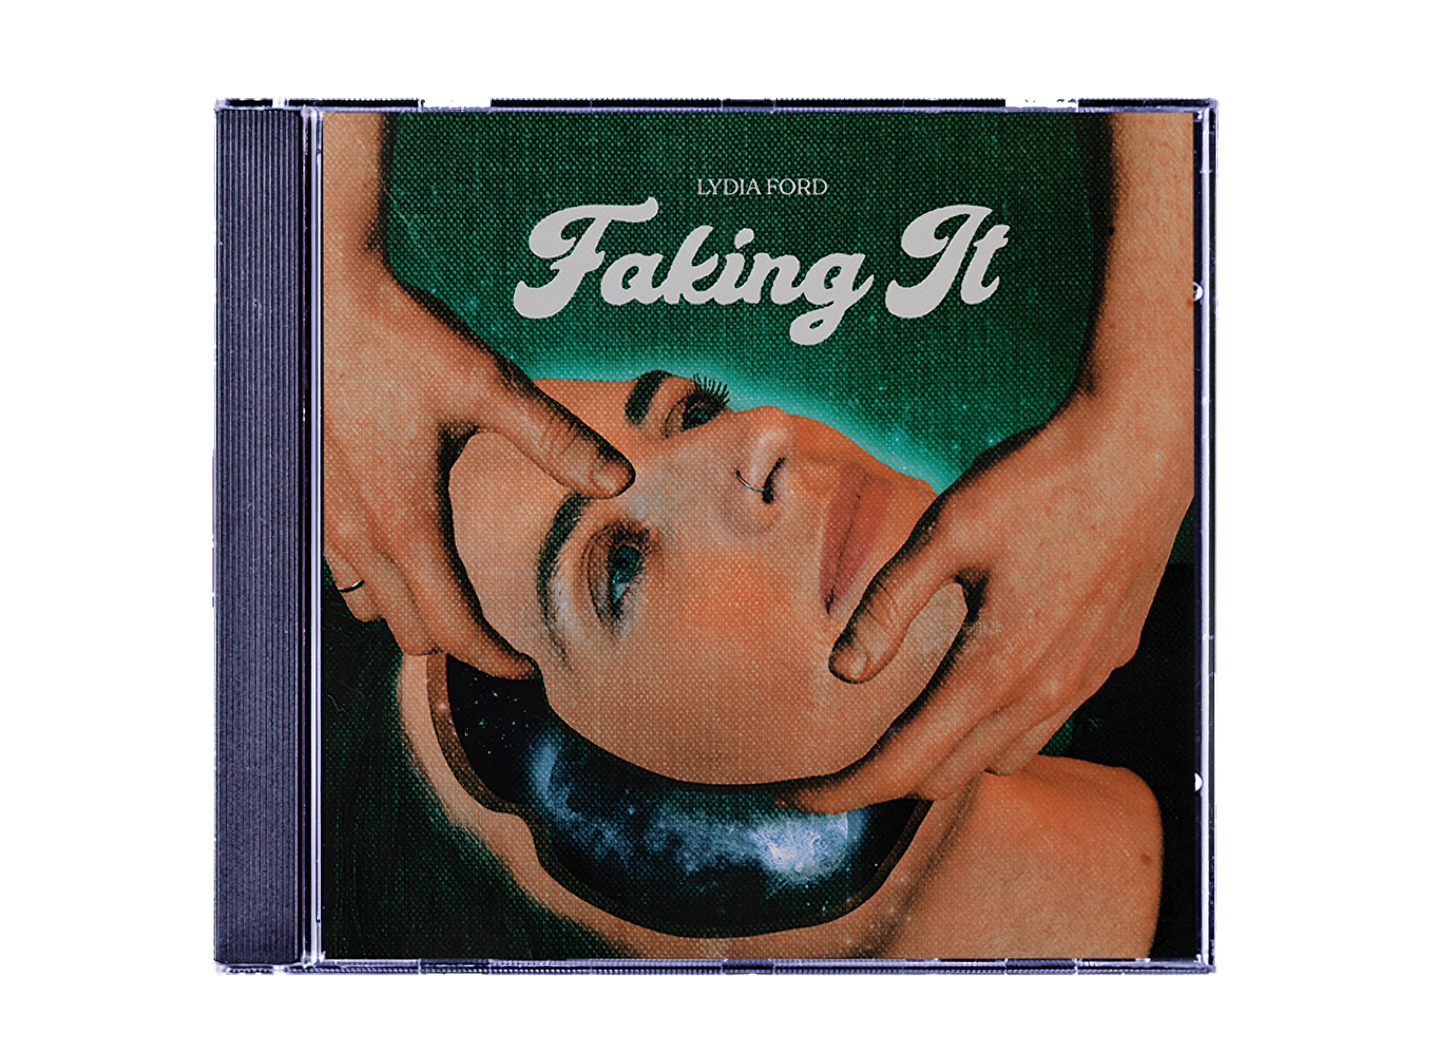 Lydia Ford - Faking It (CD)